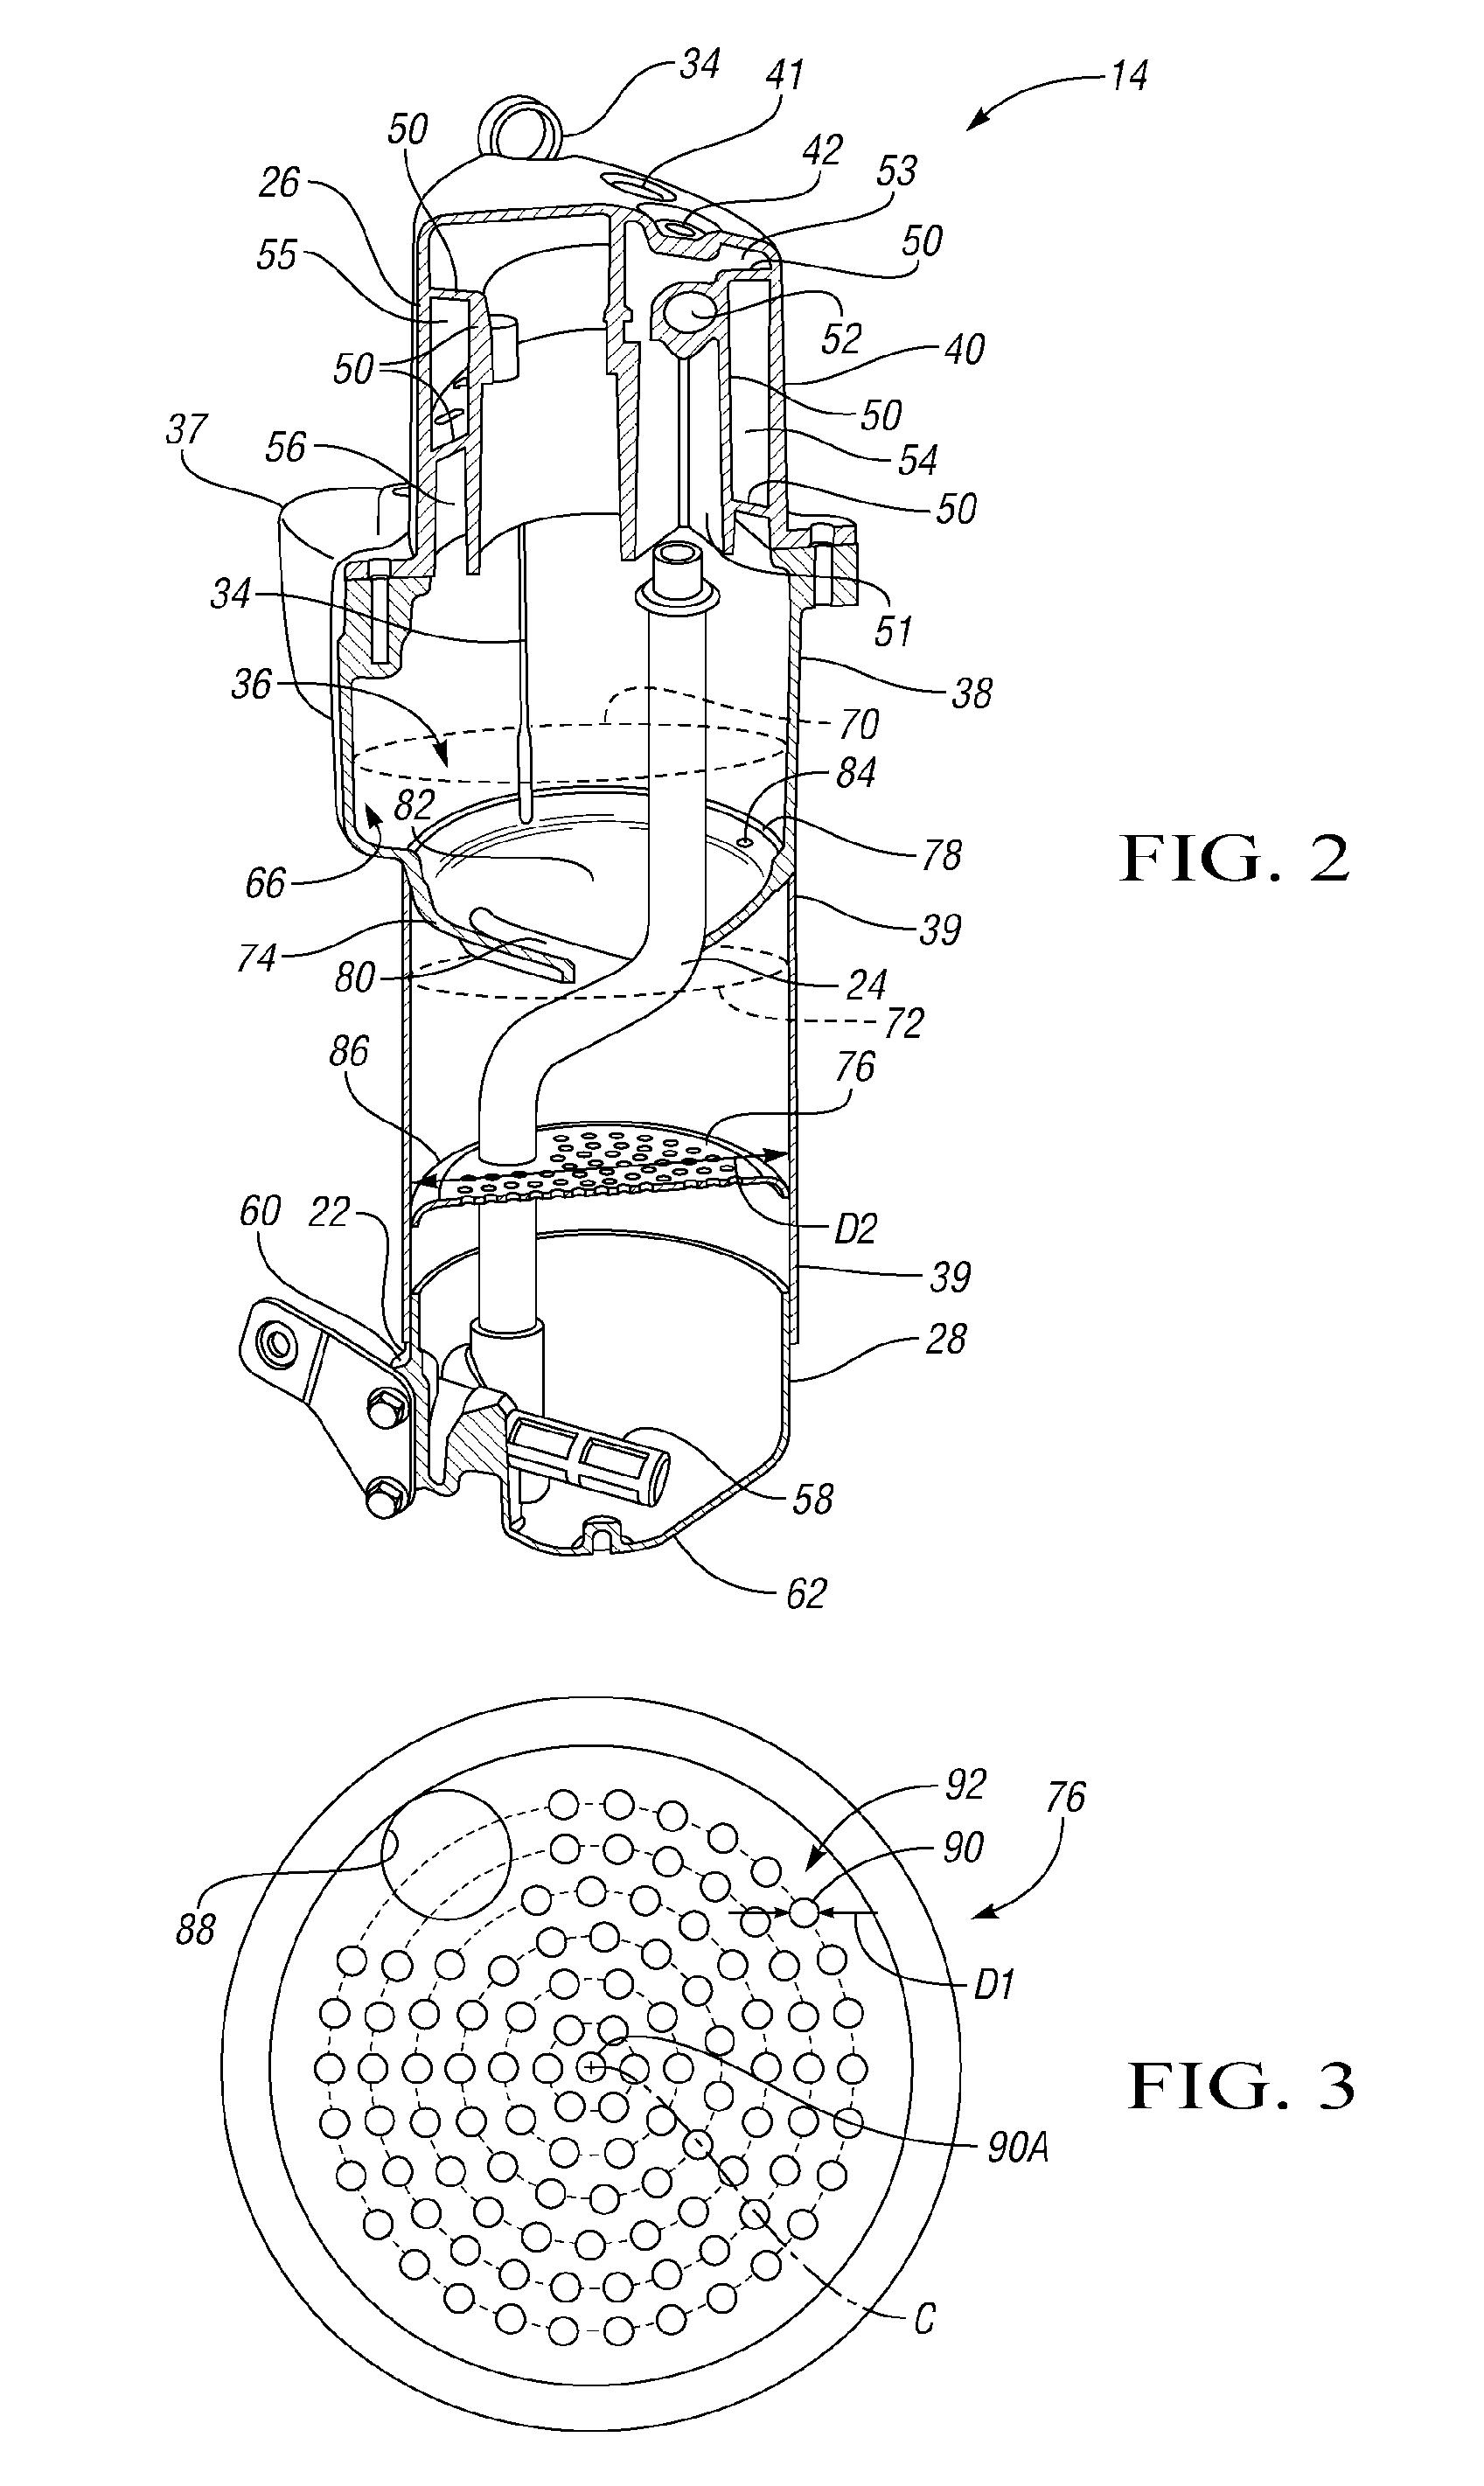 Dry sump oil tank assembly for a vehicle